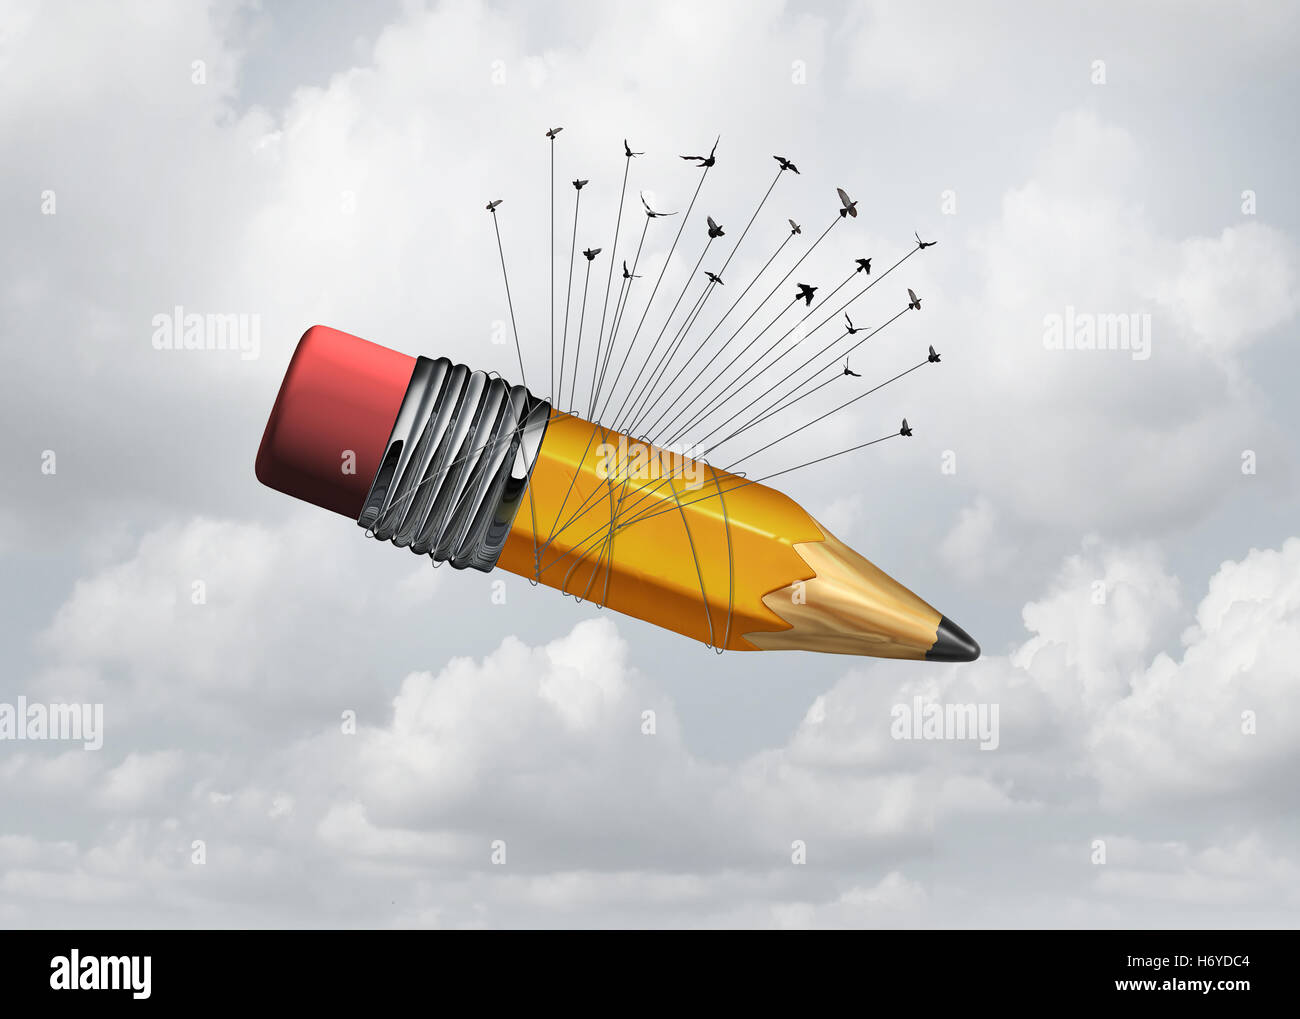 Creative cooperation and group collaboration concept as a flock of birds lifting up a giant pencil as an education metaphor of organized success or business symbol for working together with 3D illustration elements. Stock Photo